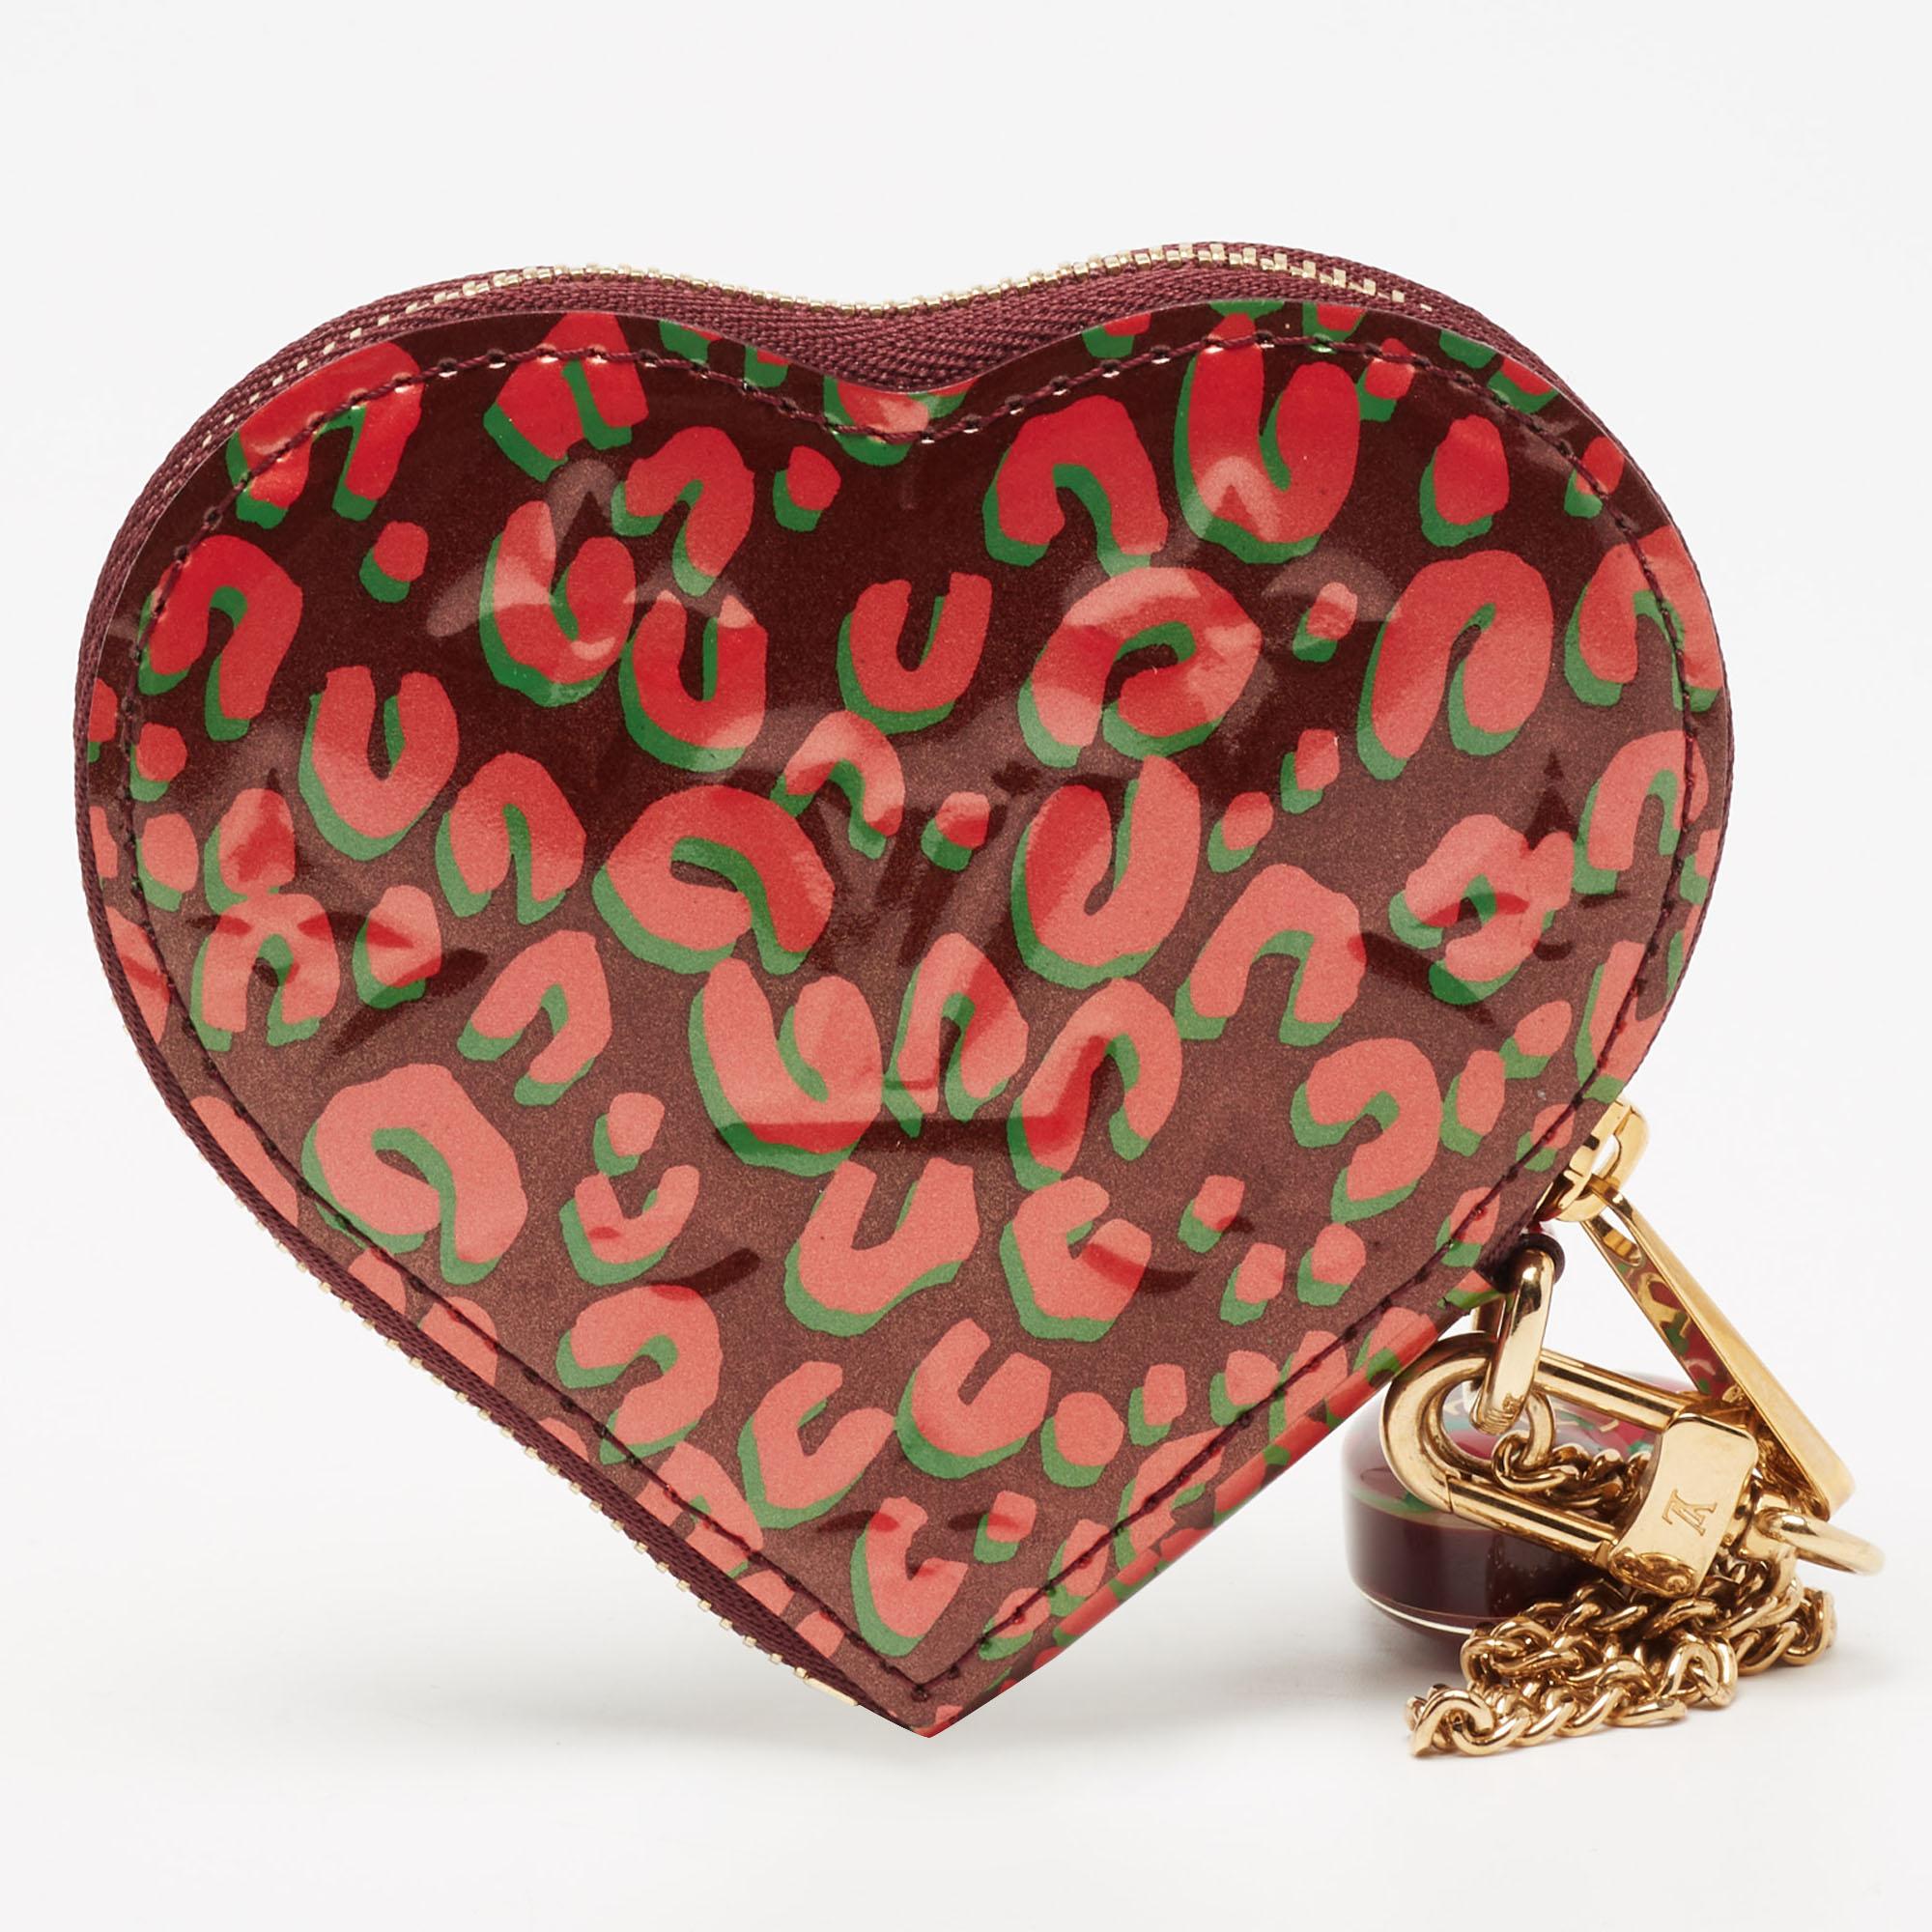 This coin case from Louis Vuitton is a delightful creation. The heart-shaped purse has been wonderfully crafted from the signature Vernis leather and flaunts an LV padlock charm. The top zipper closure of the purse opens to reveal a leather-lined